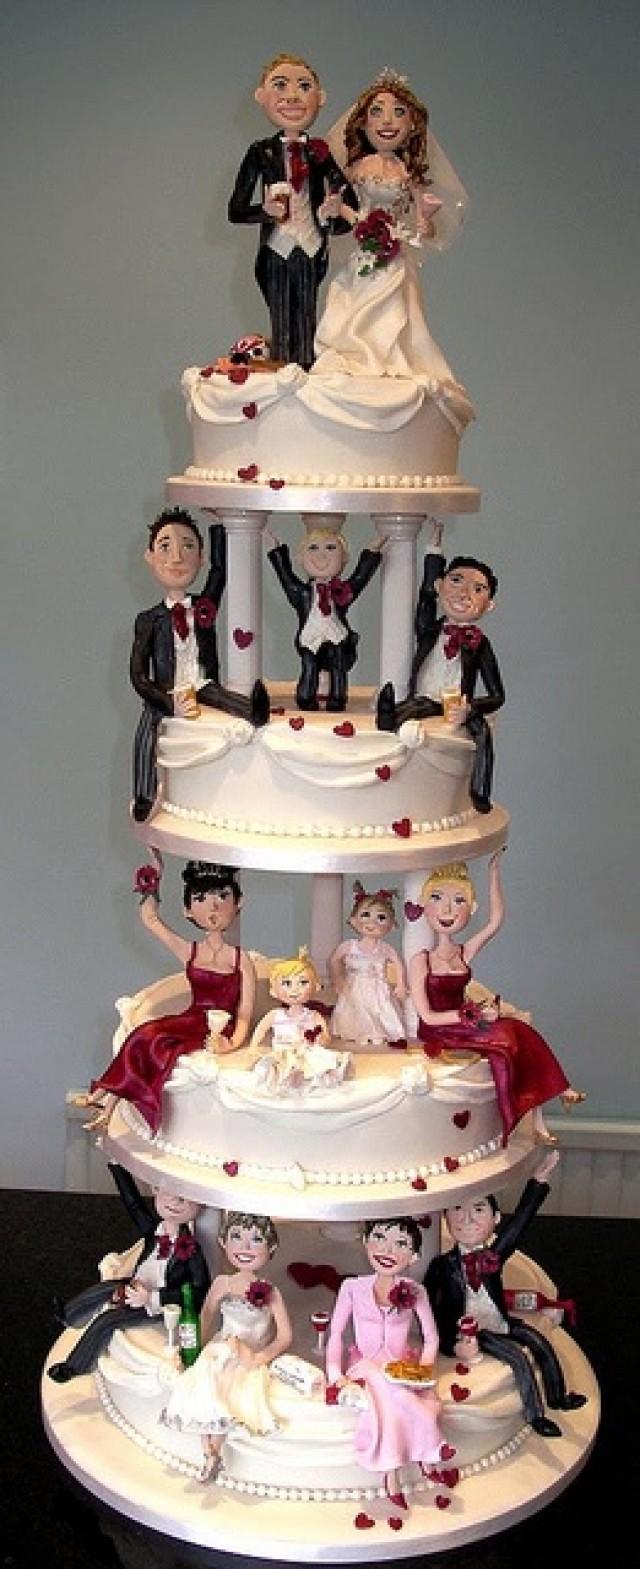 121 Amazing Wedding Cake Ideas You Will Love • Cool Crafts